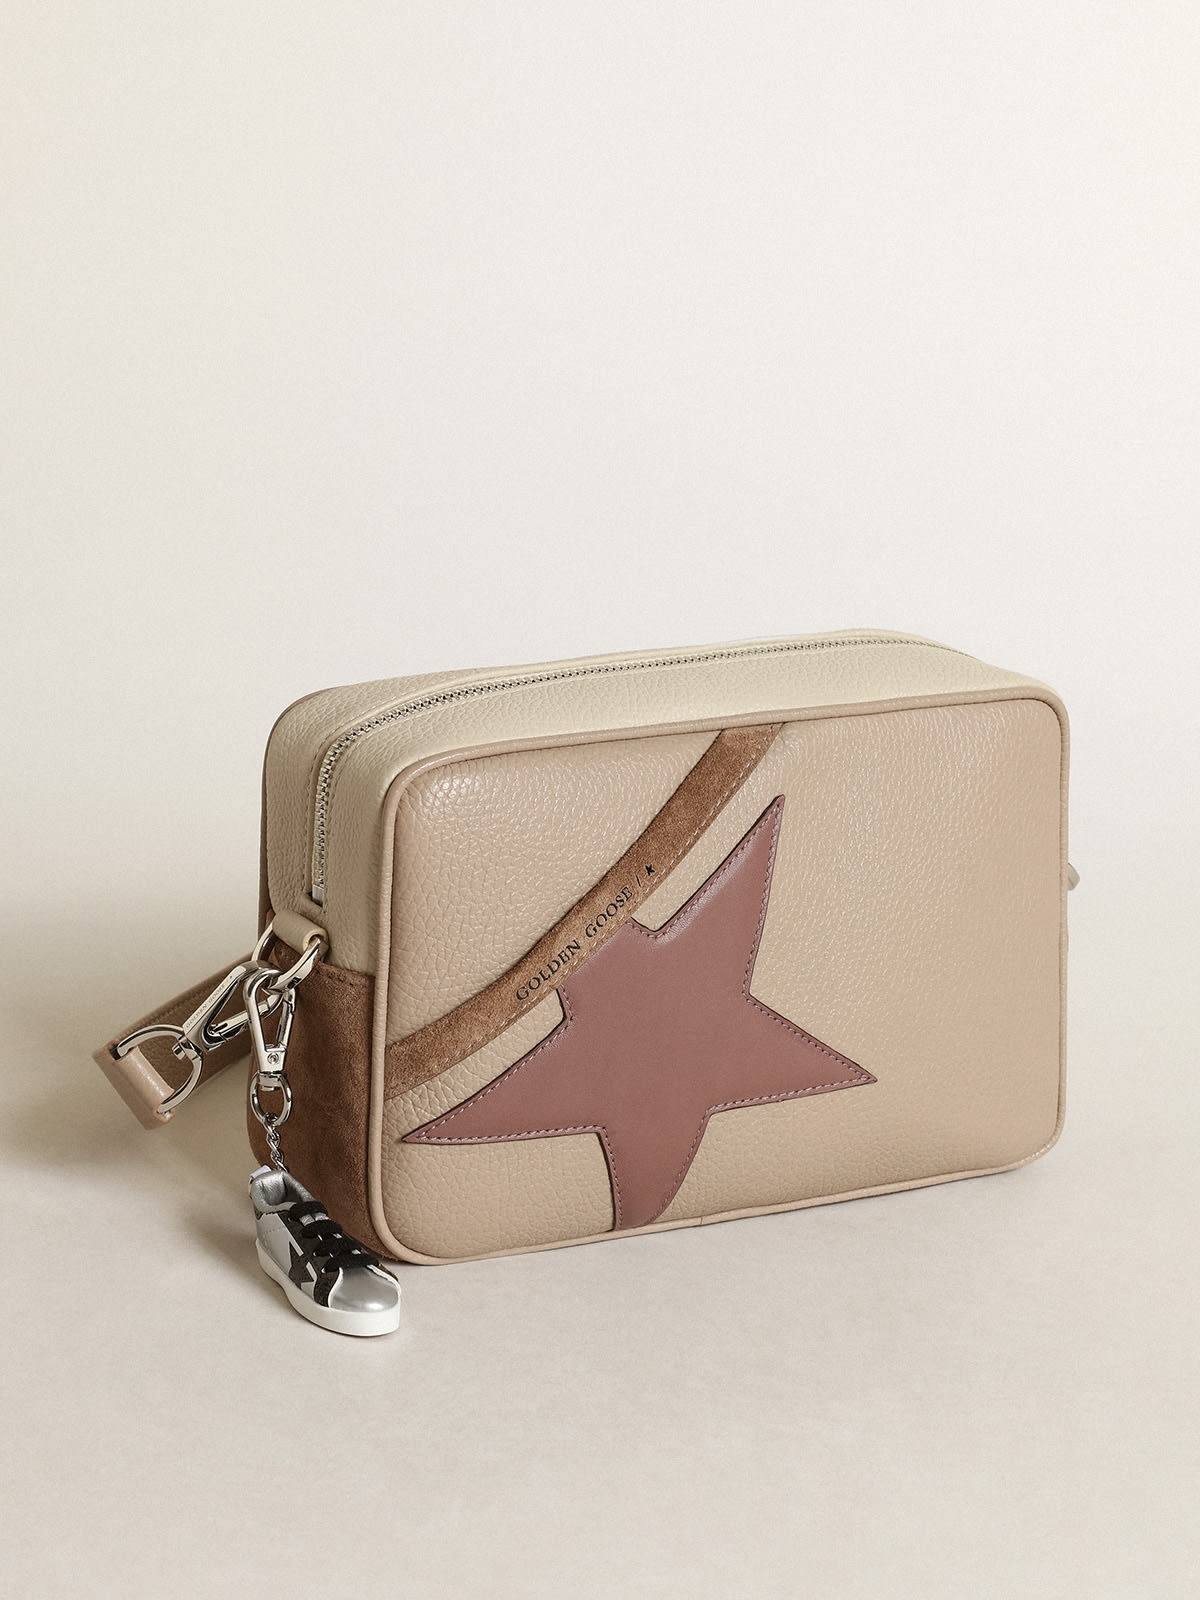 Large Star Bag in off-white hammered leather and cappuccino-colored suede with purple leather star - 4